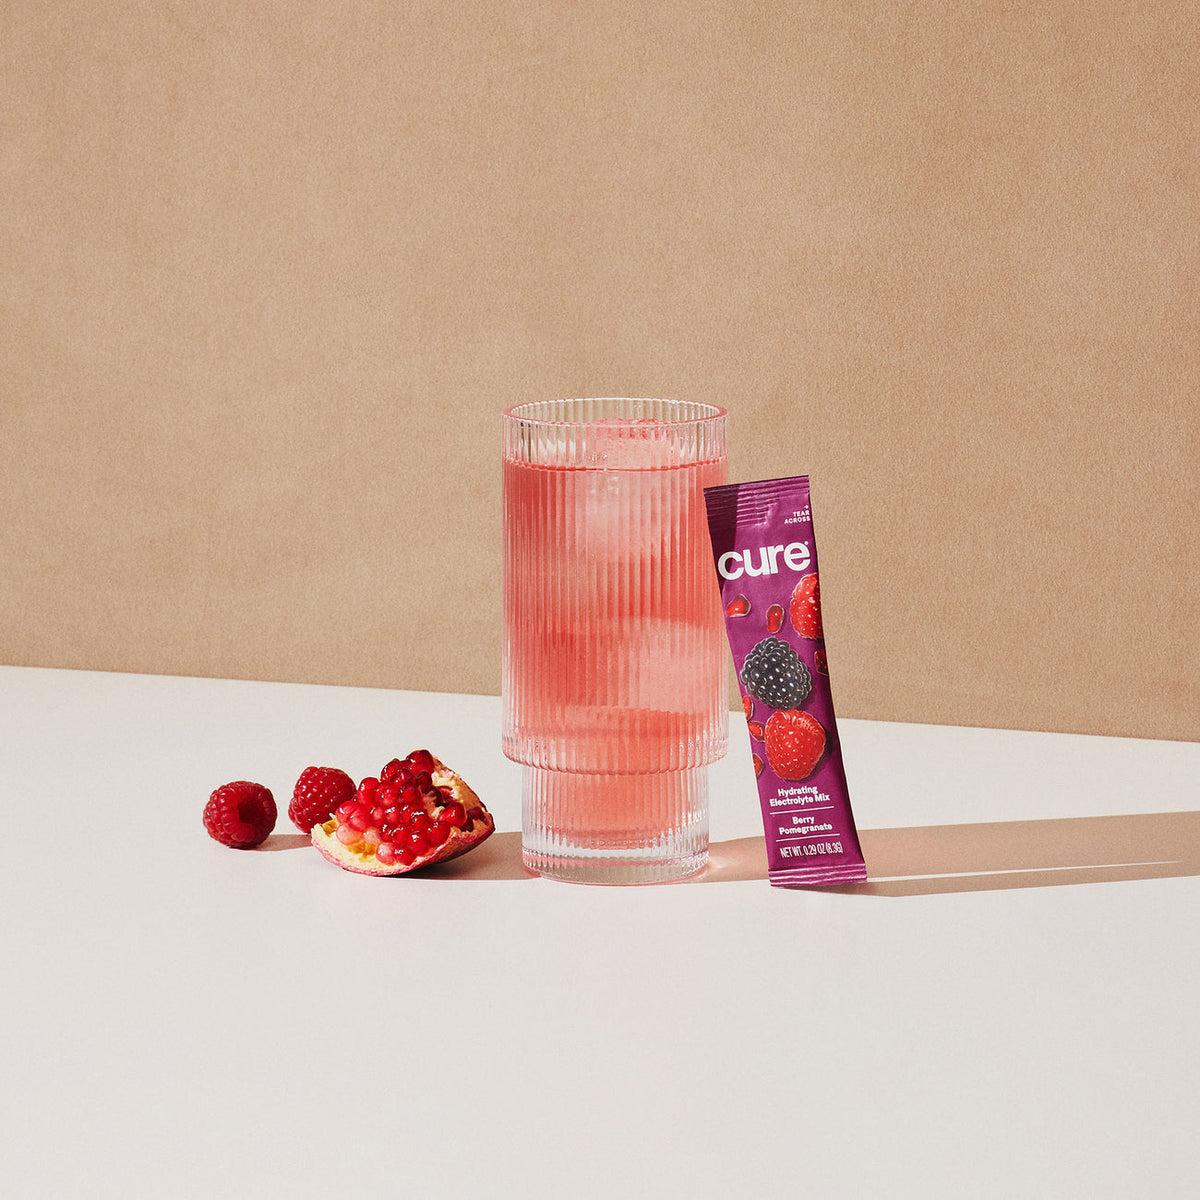 Berry Pomegranate - Hydrating Electrolyte Drink Mix with no Added Sugar or Artificial Ingredients by Cure